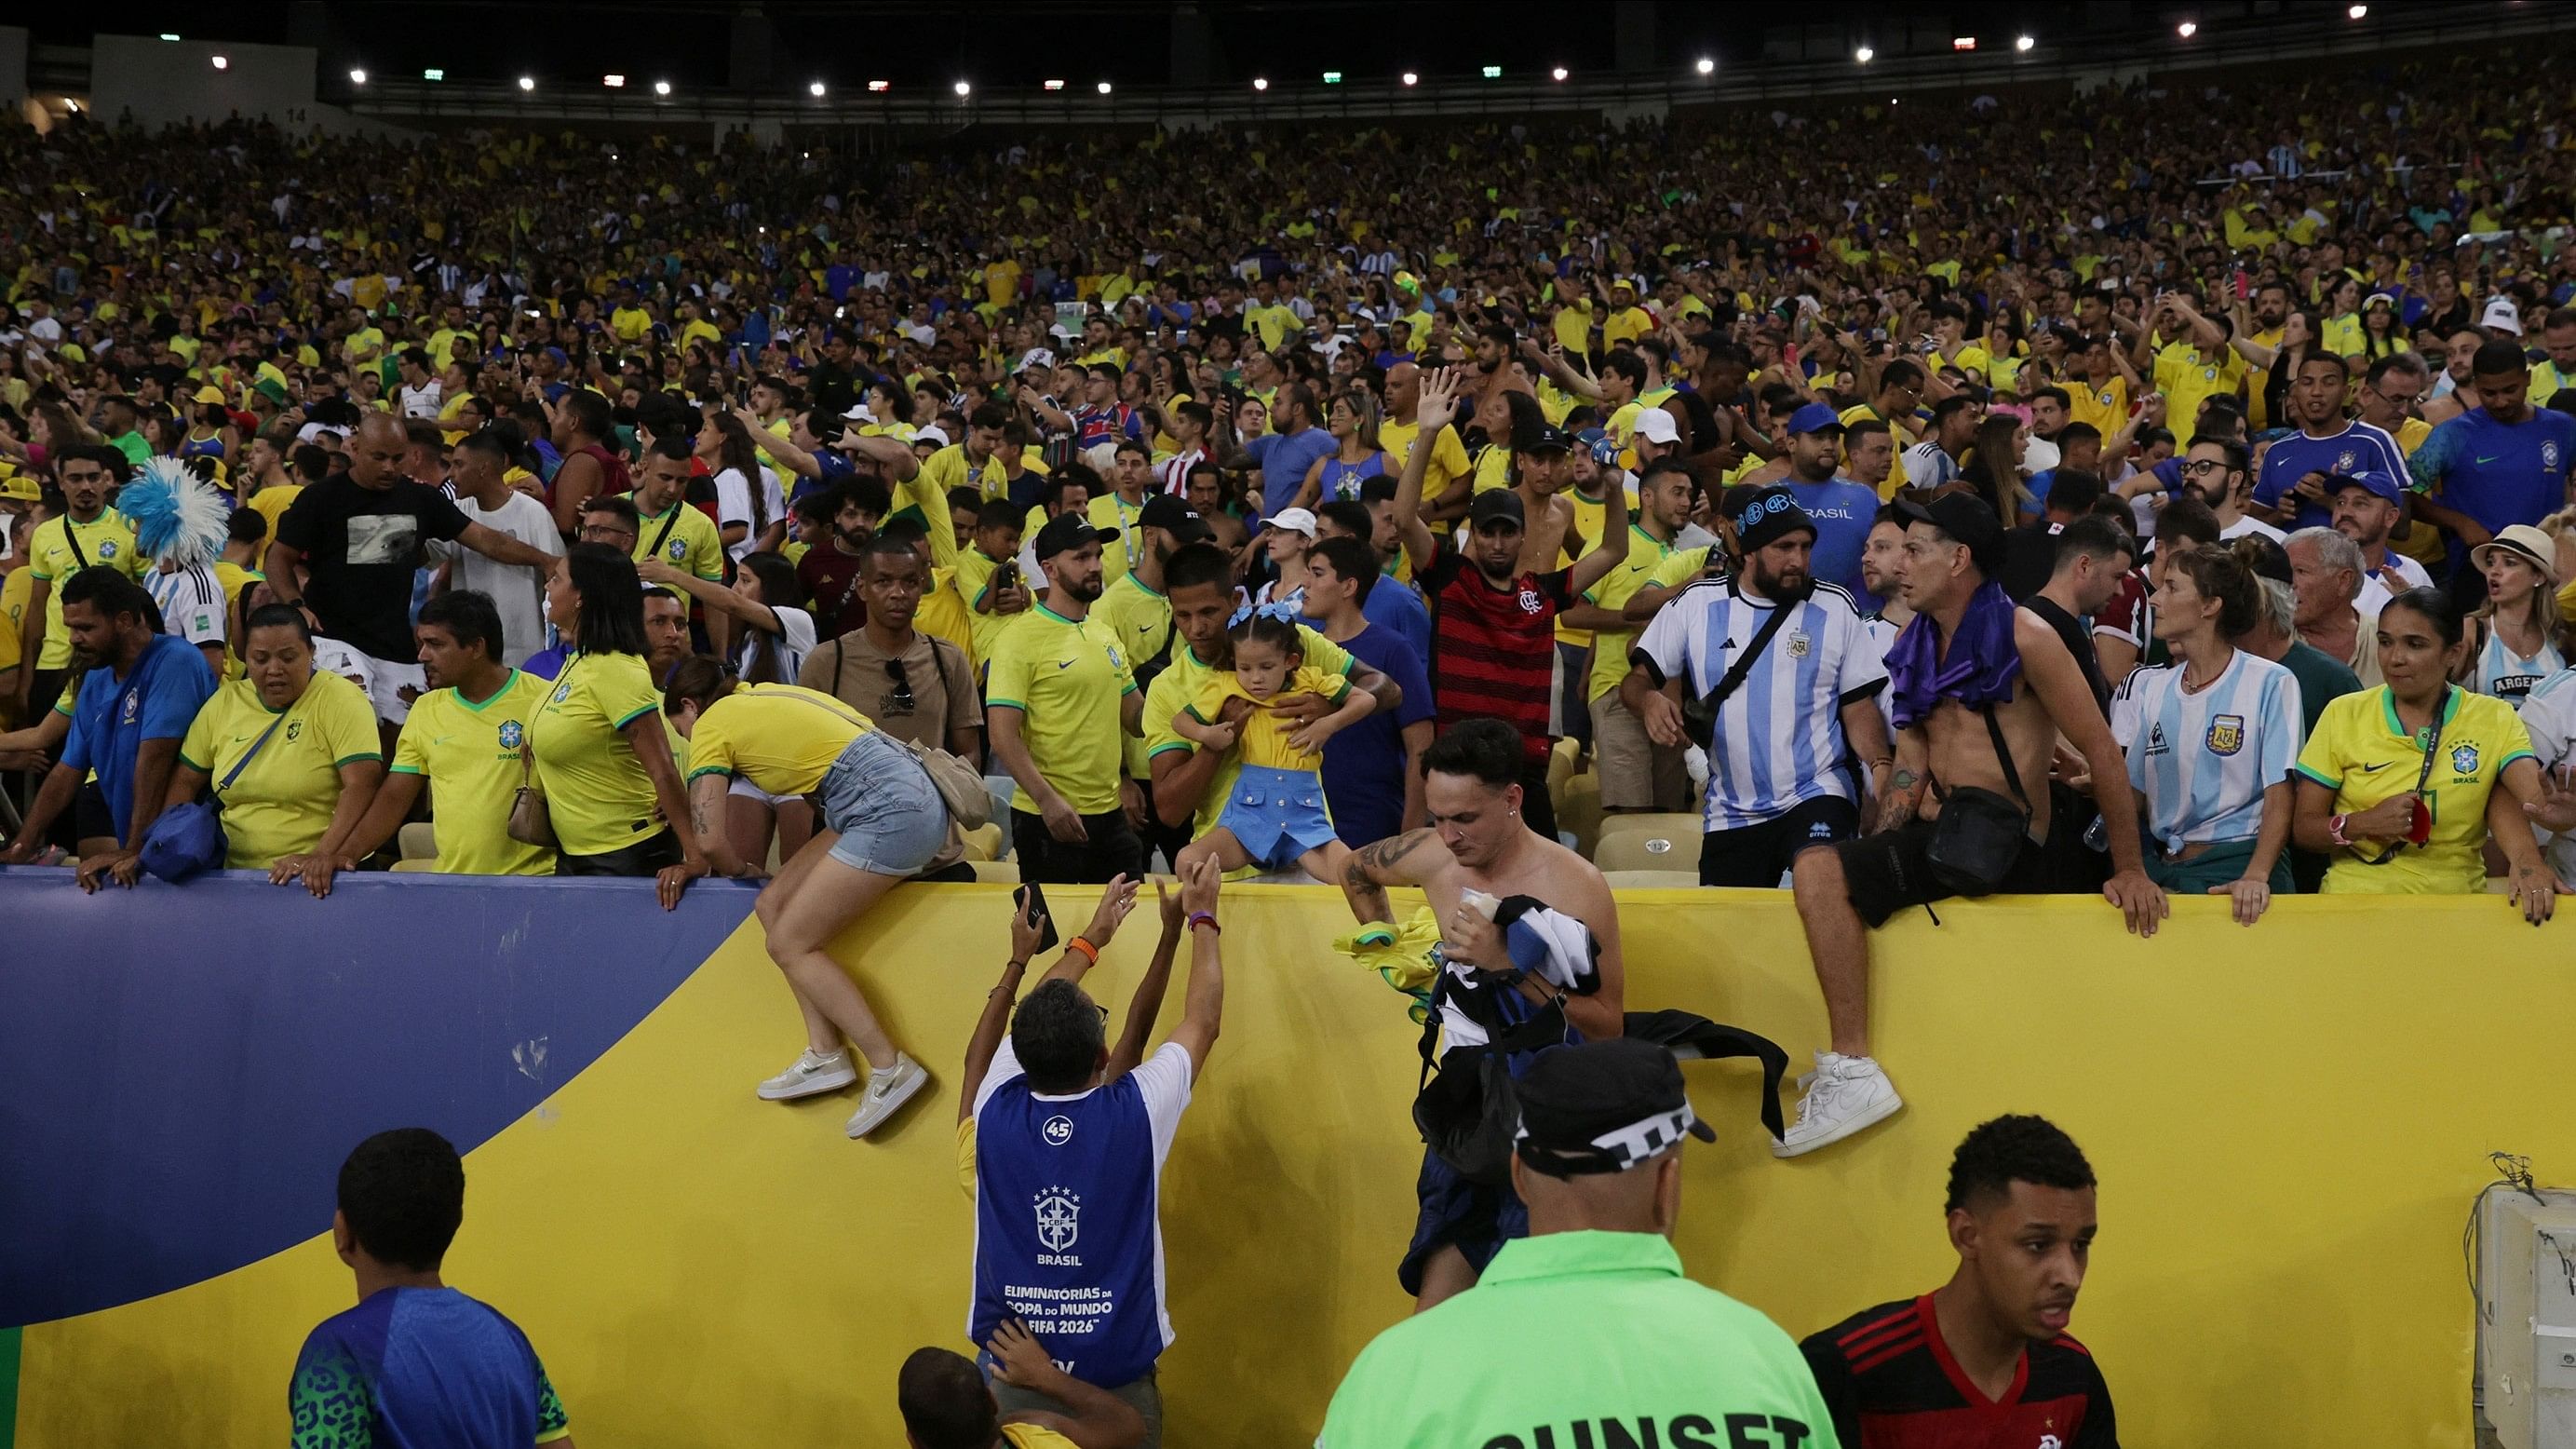 <div class="paragraphs"><p>Brazil v Argentina - Estadio Maracana, Rio de Janeiro,  Fans clash with security staff in the stands causing a delay to the start of the match.</p></div>